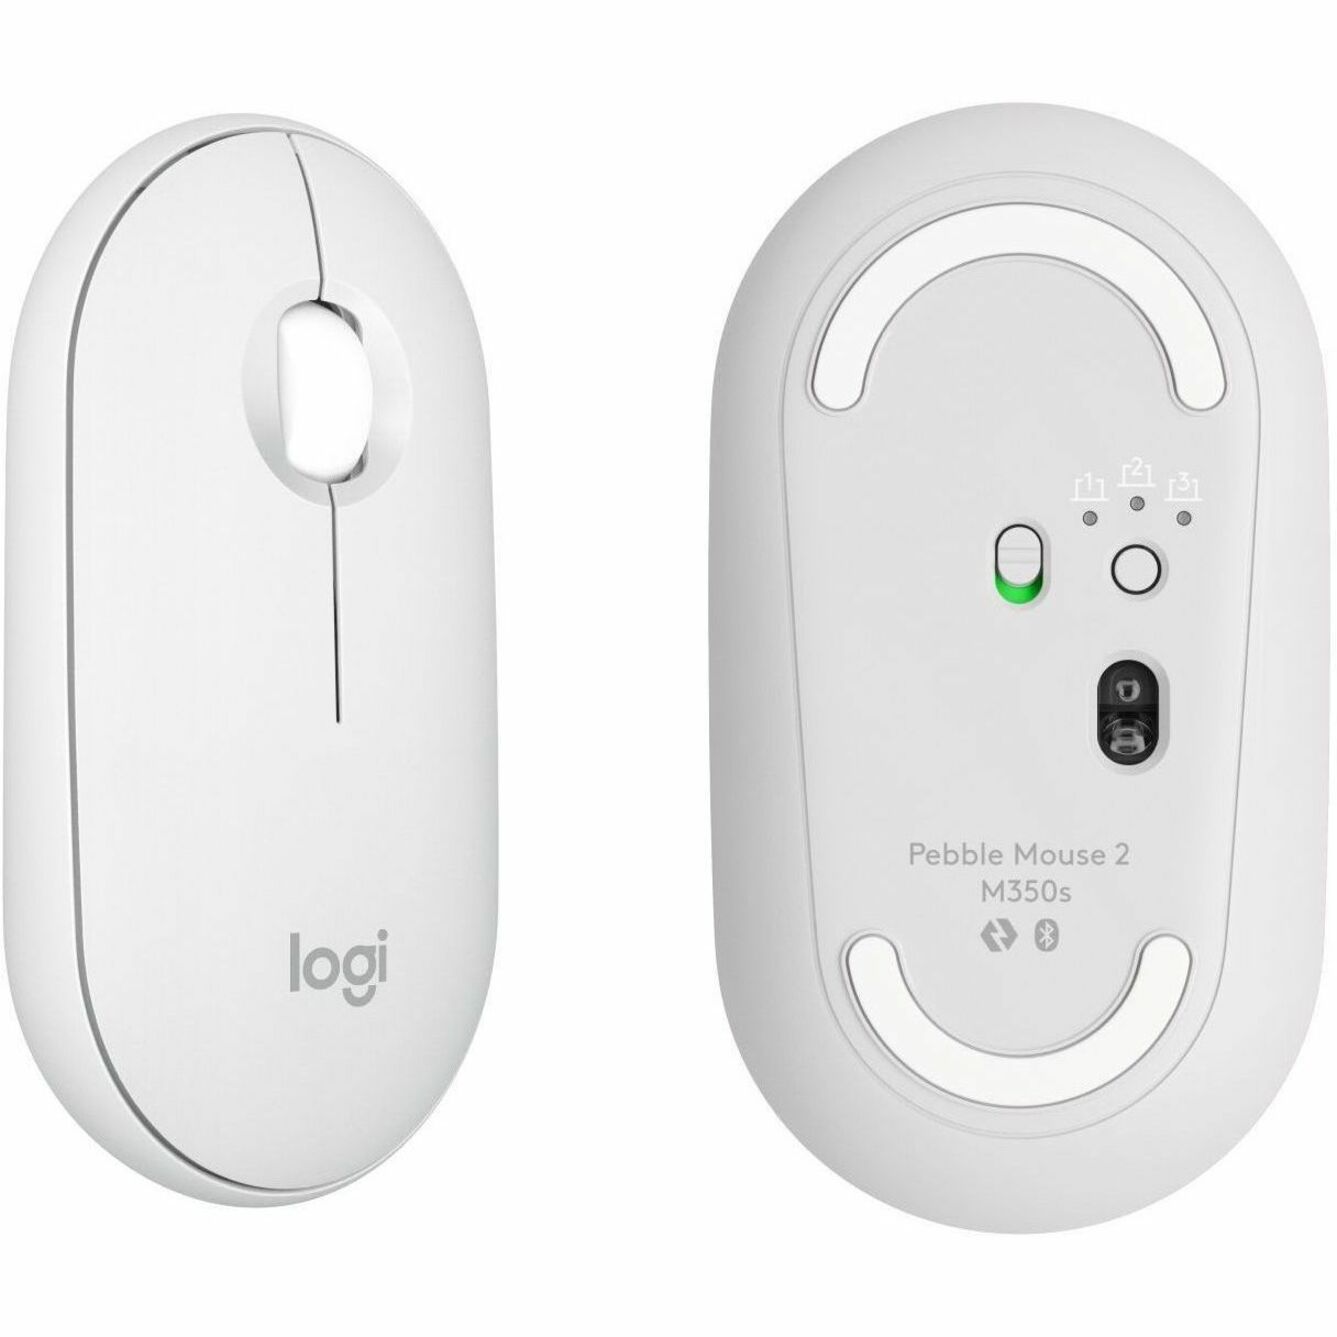 Logitech 920-012201 Pebble 2 Combo for Mac Wireless Keyboard and Mouse, Tonal White, Bluetooth, Slim, Quiet Keys